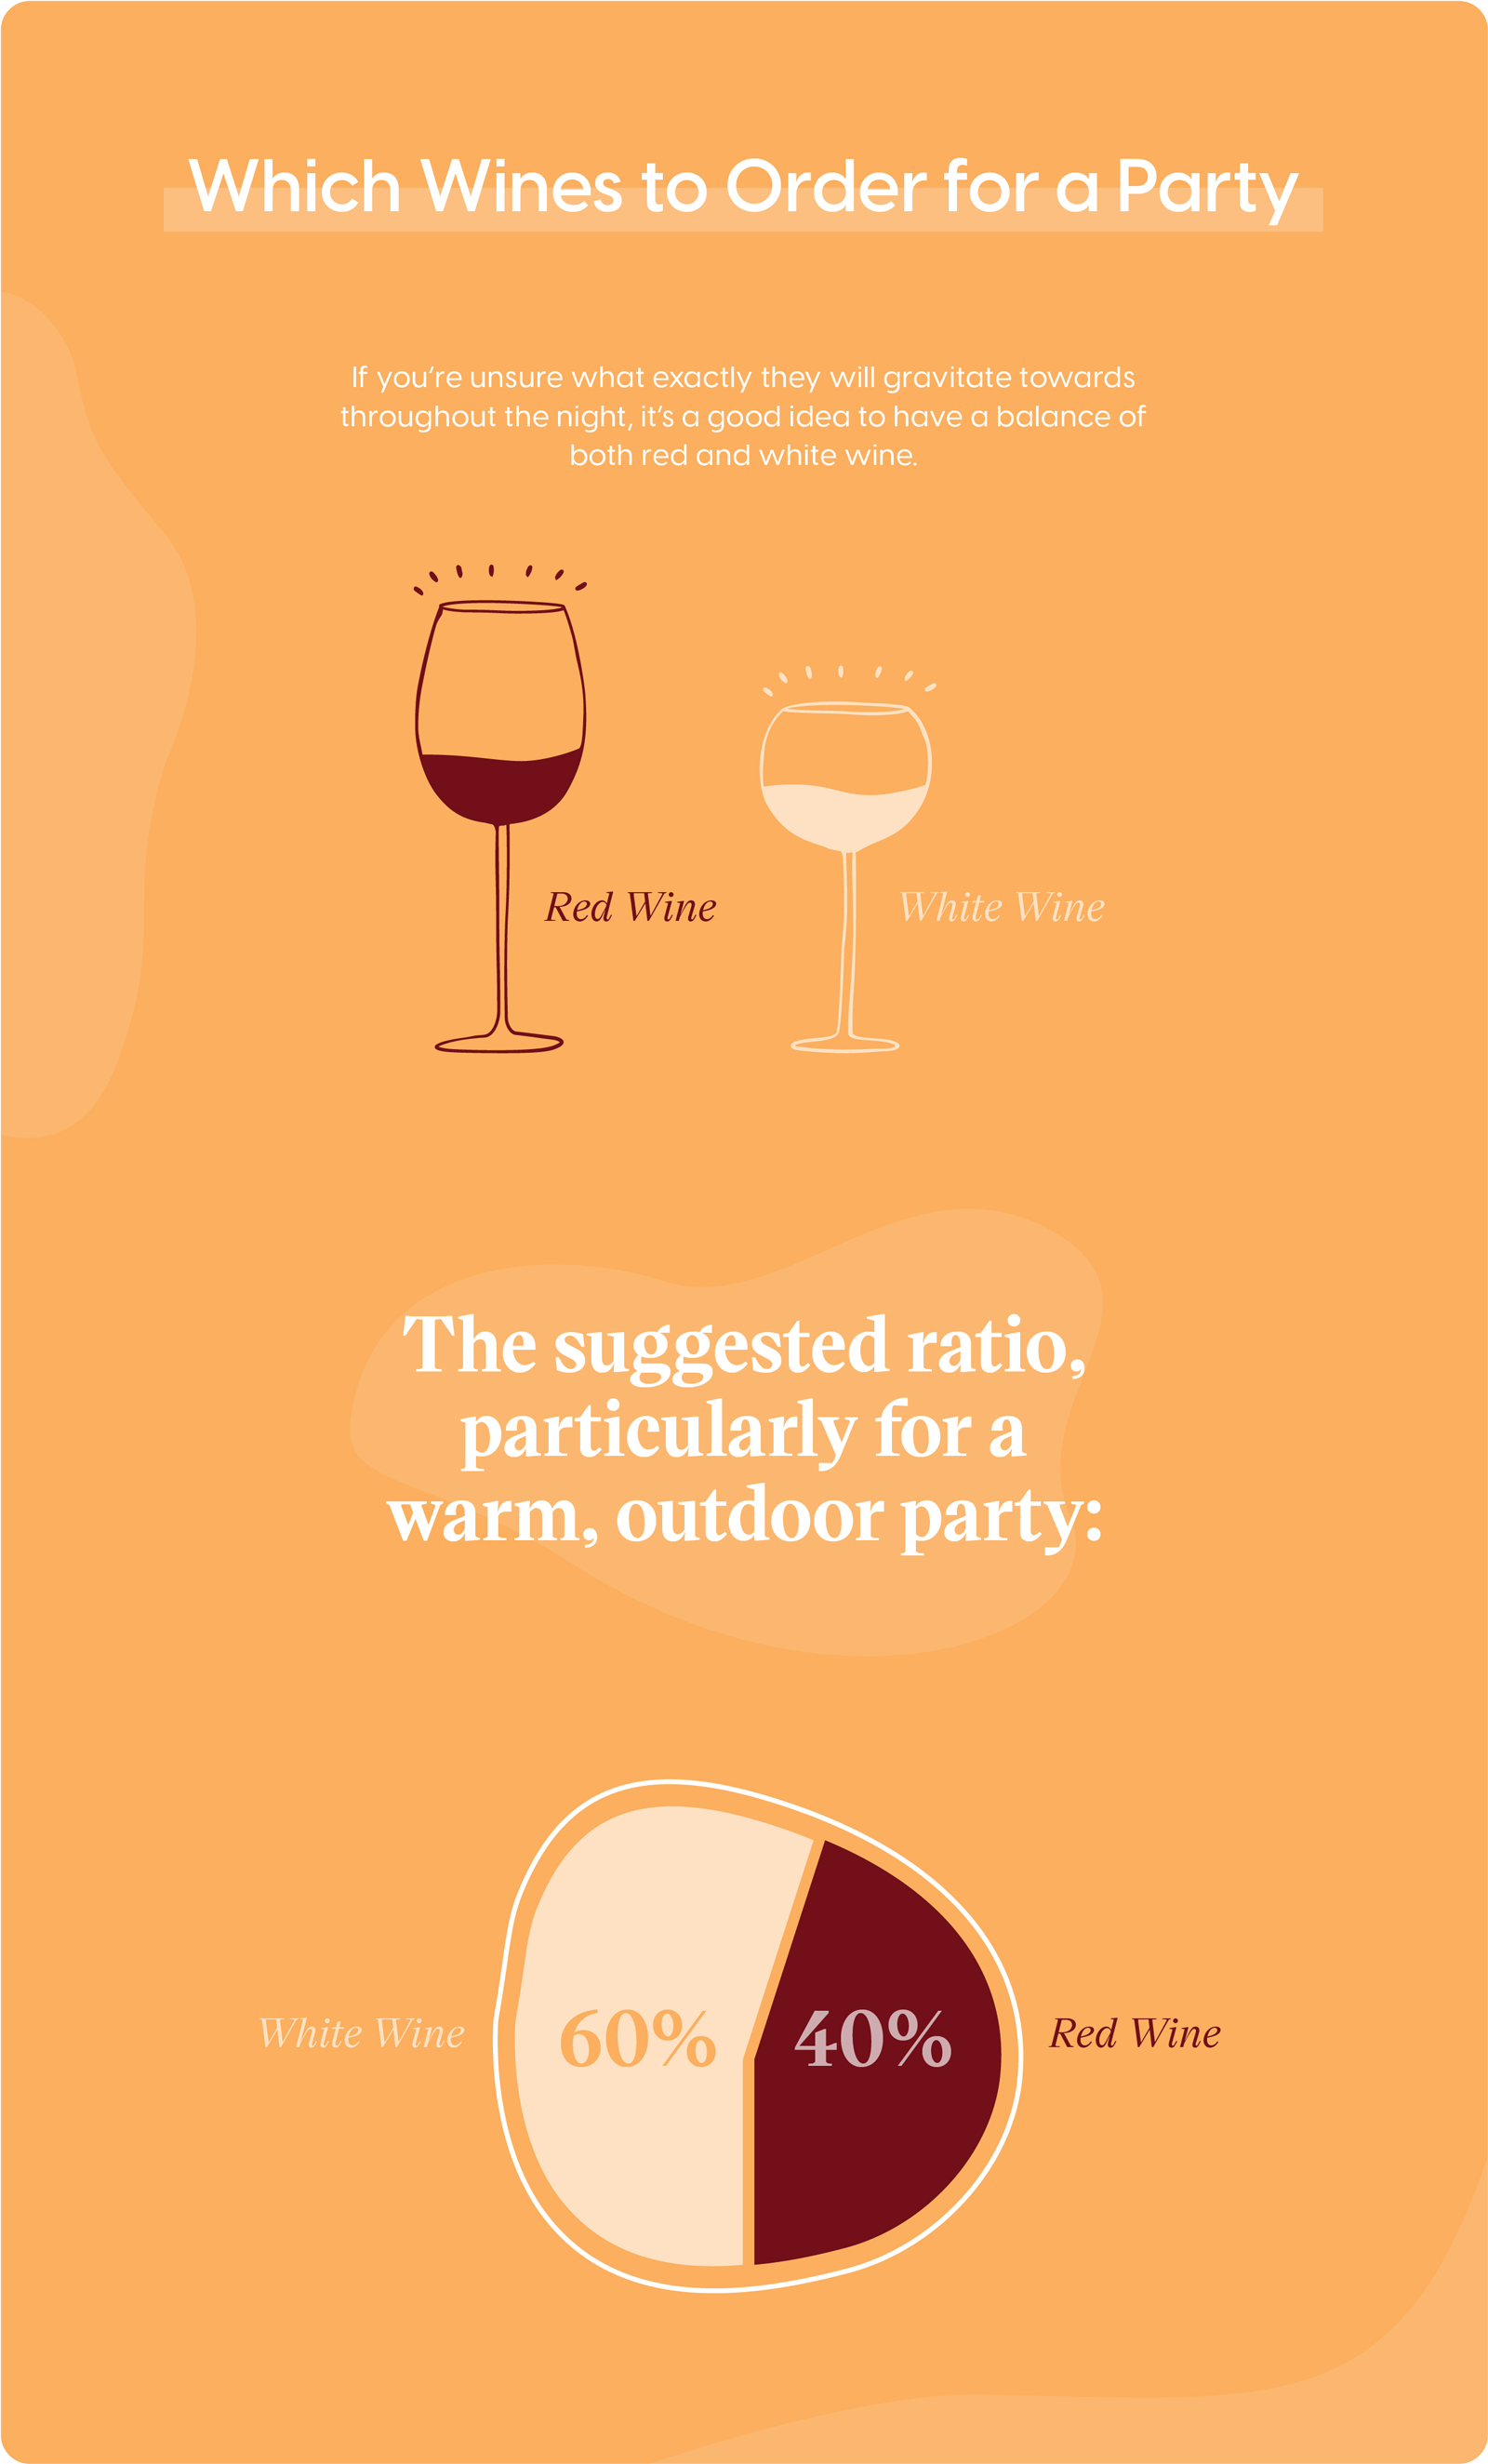 Which Wines to Order for a Party? Red and White Wine